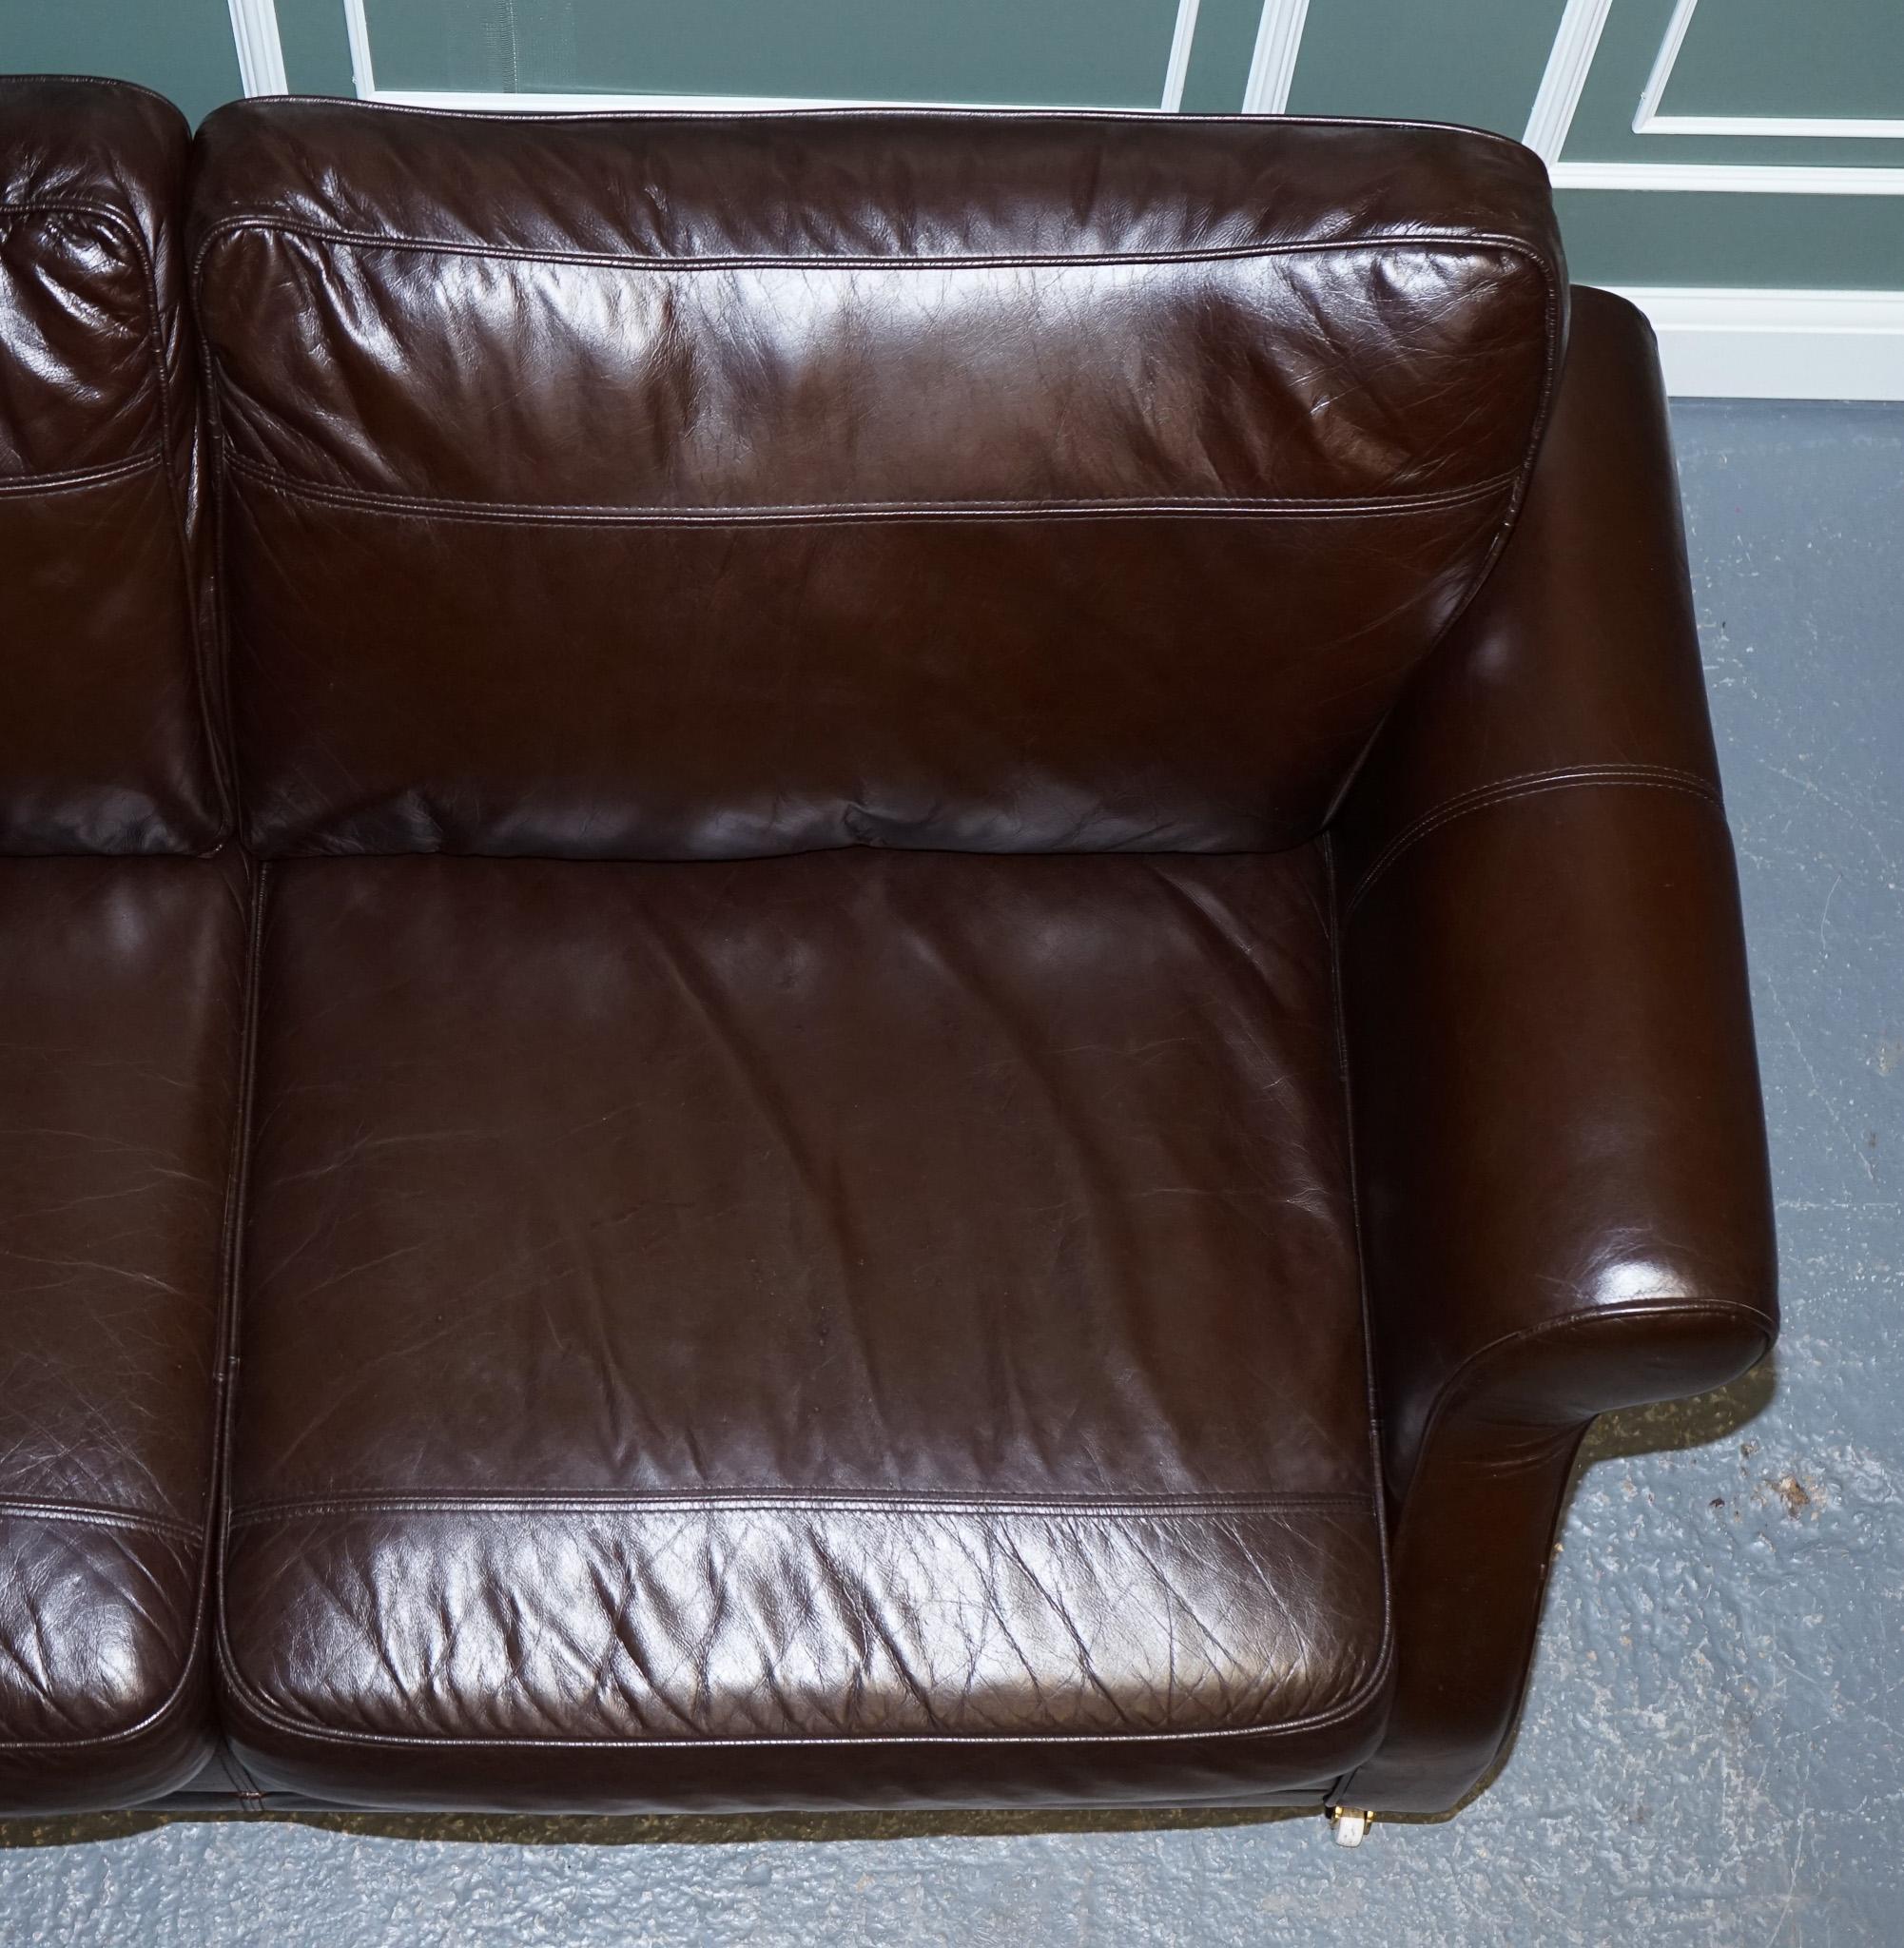 VINTAGE STUNNiNG CHOCOLATE BROWN LEATHER 2 TO 3 SEATER SOFA For Sale 1